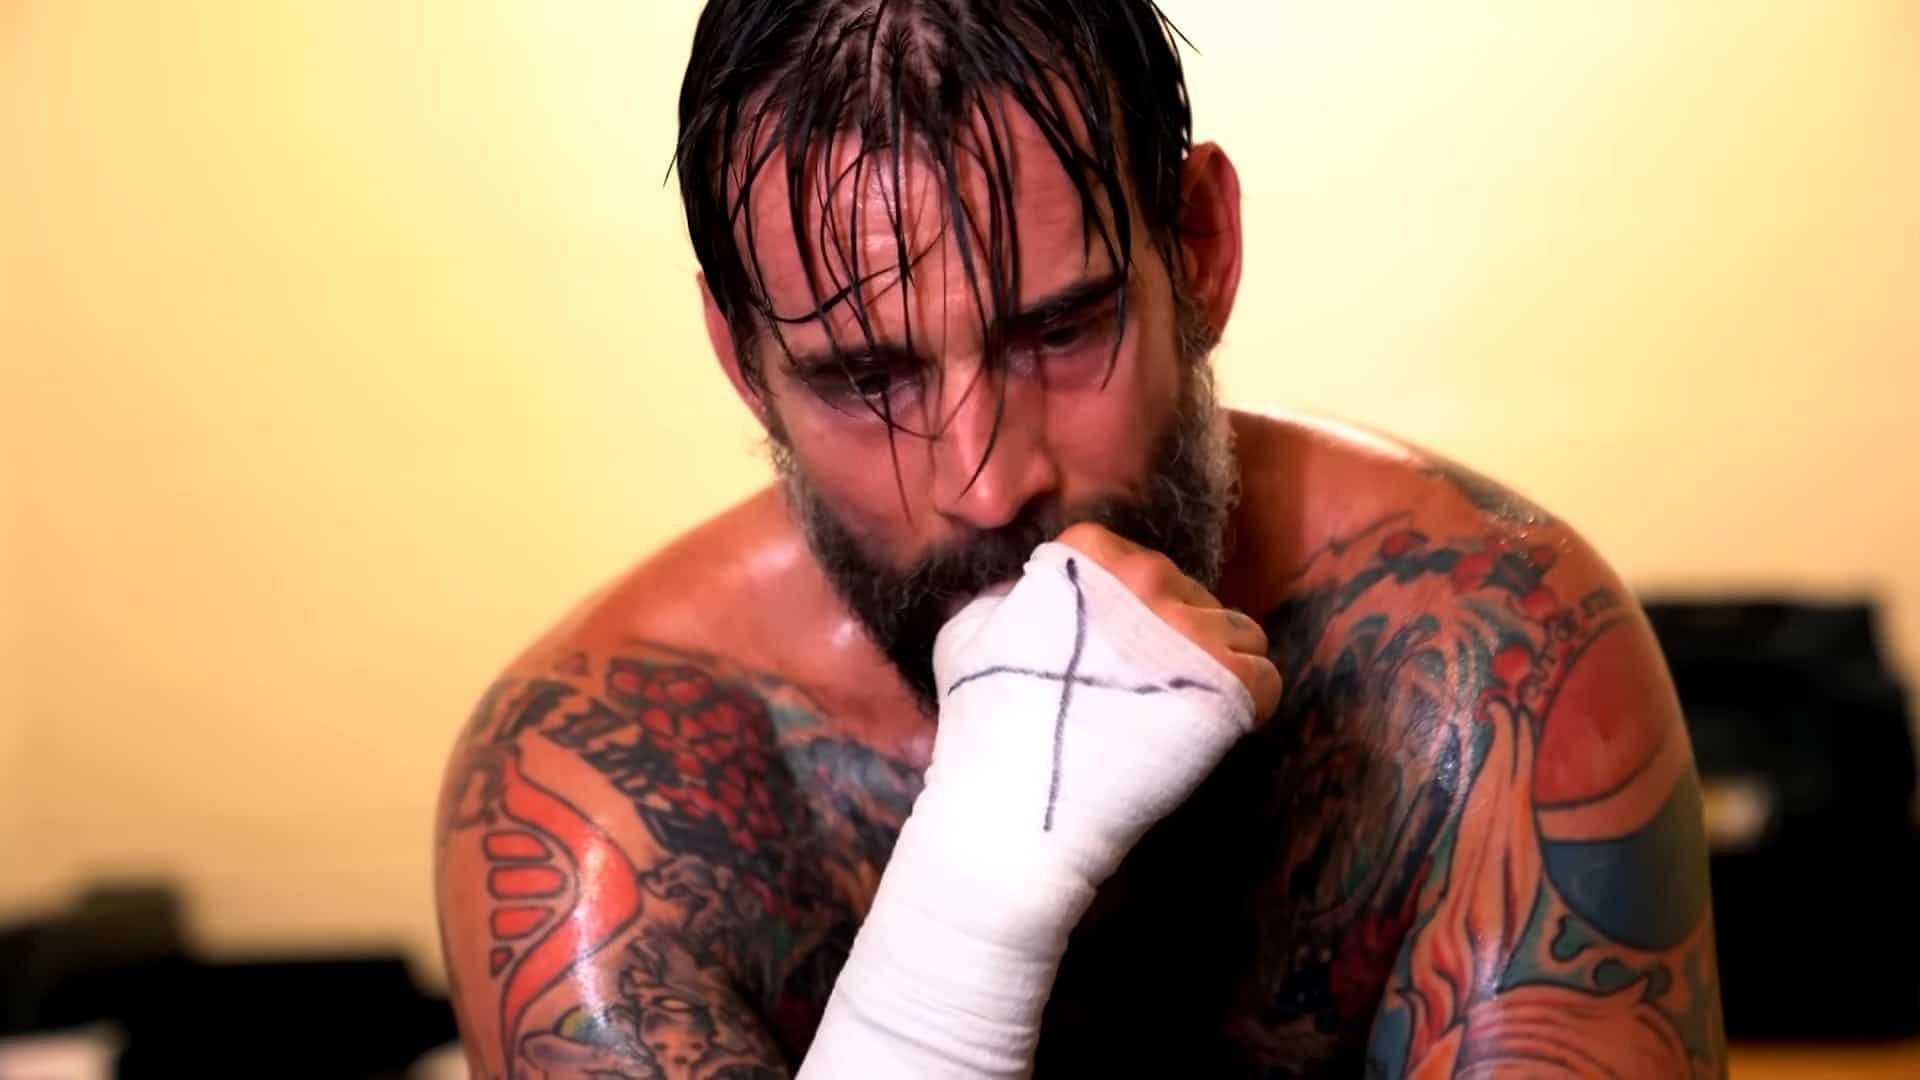 Punk Came In As The Outsider Wwe Veteran Weighs In On The Aew